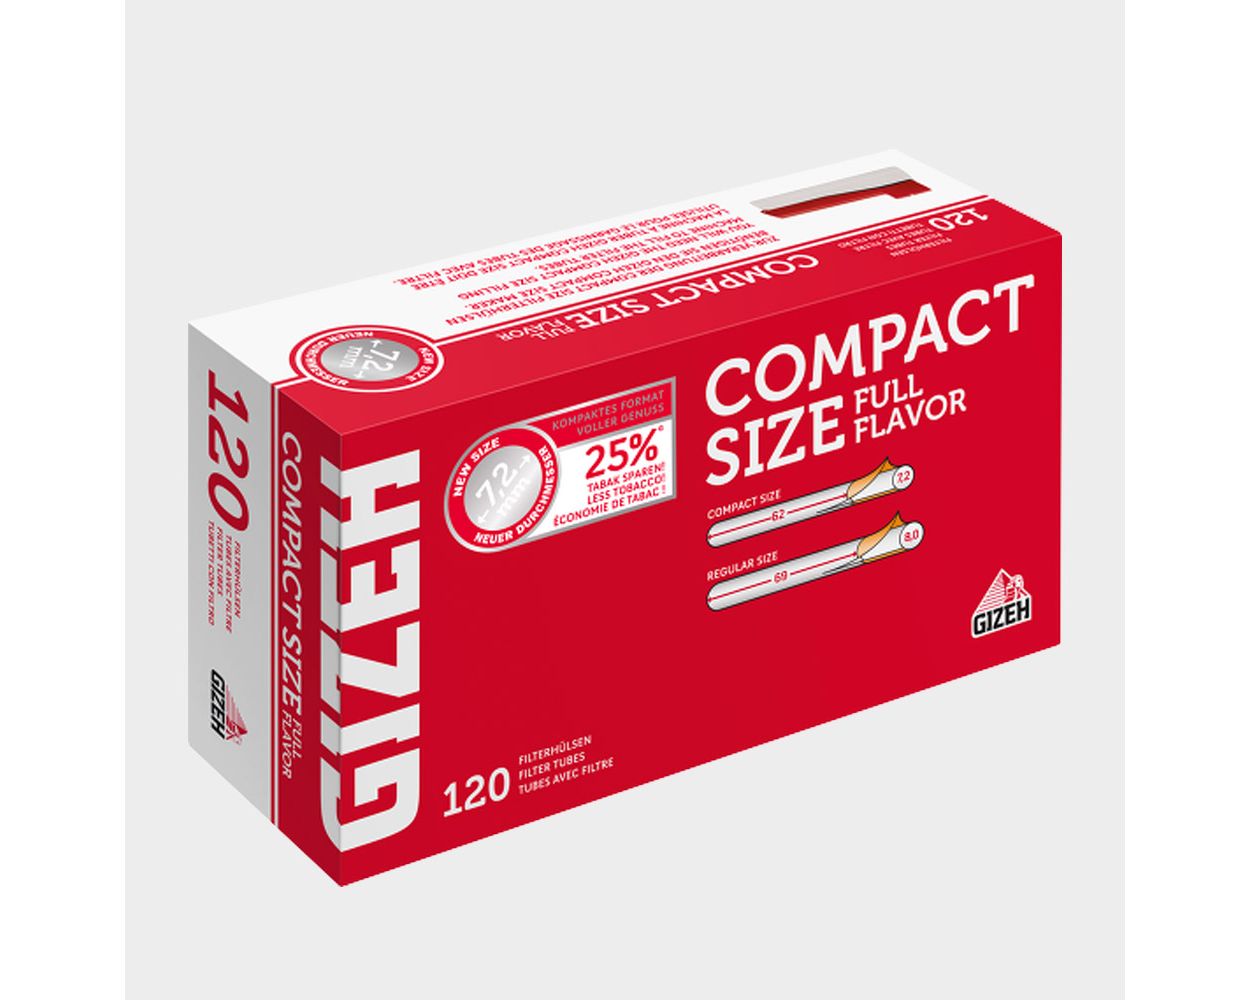 Gizeh Compact Size Cigarette Tubes 120 Pack